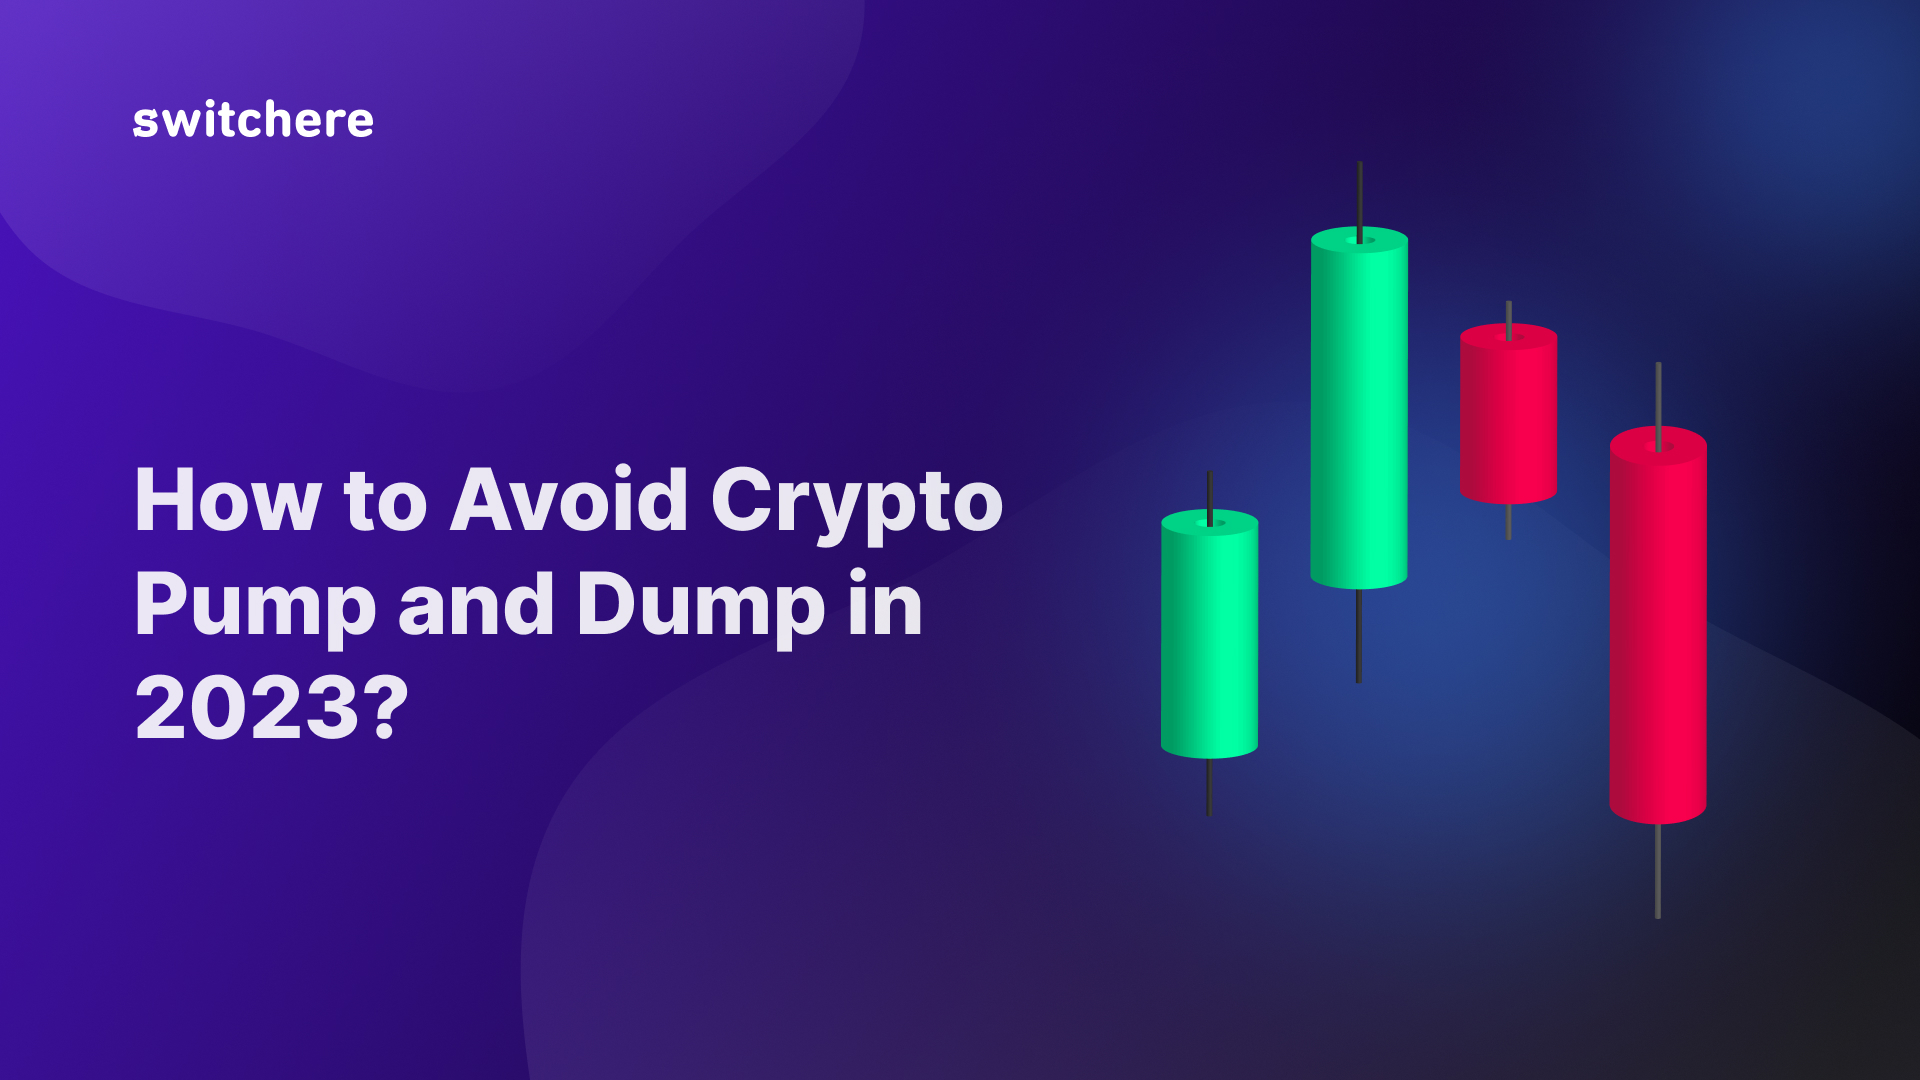 How to Avoid Crypto Pump and Dump in 2023?